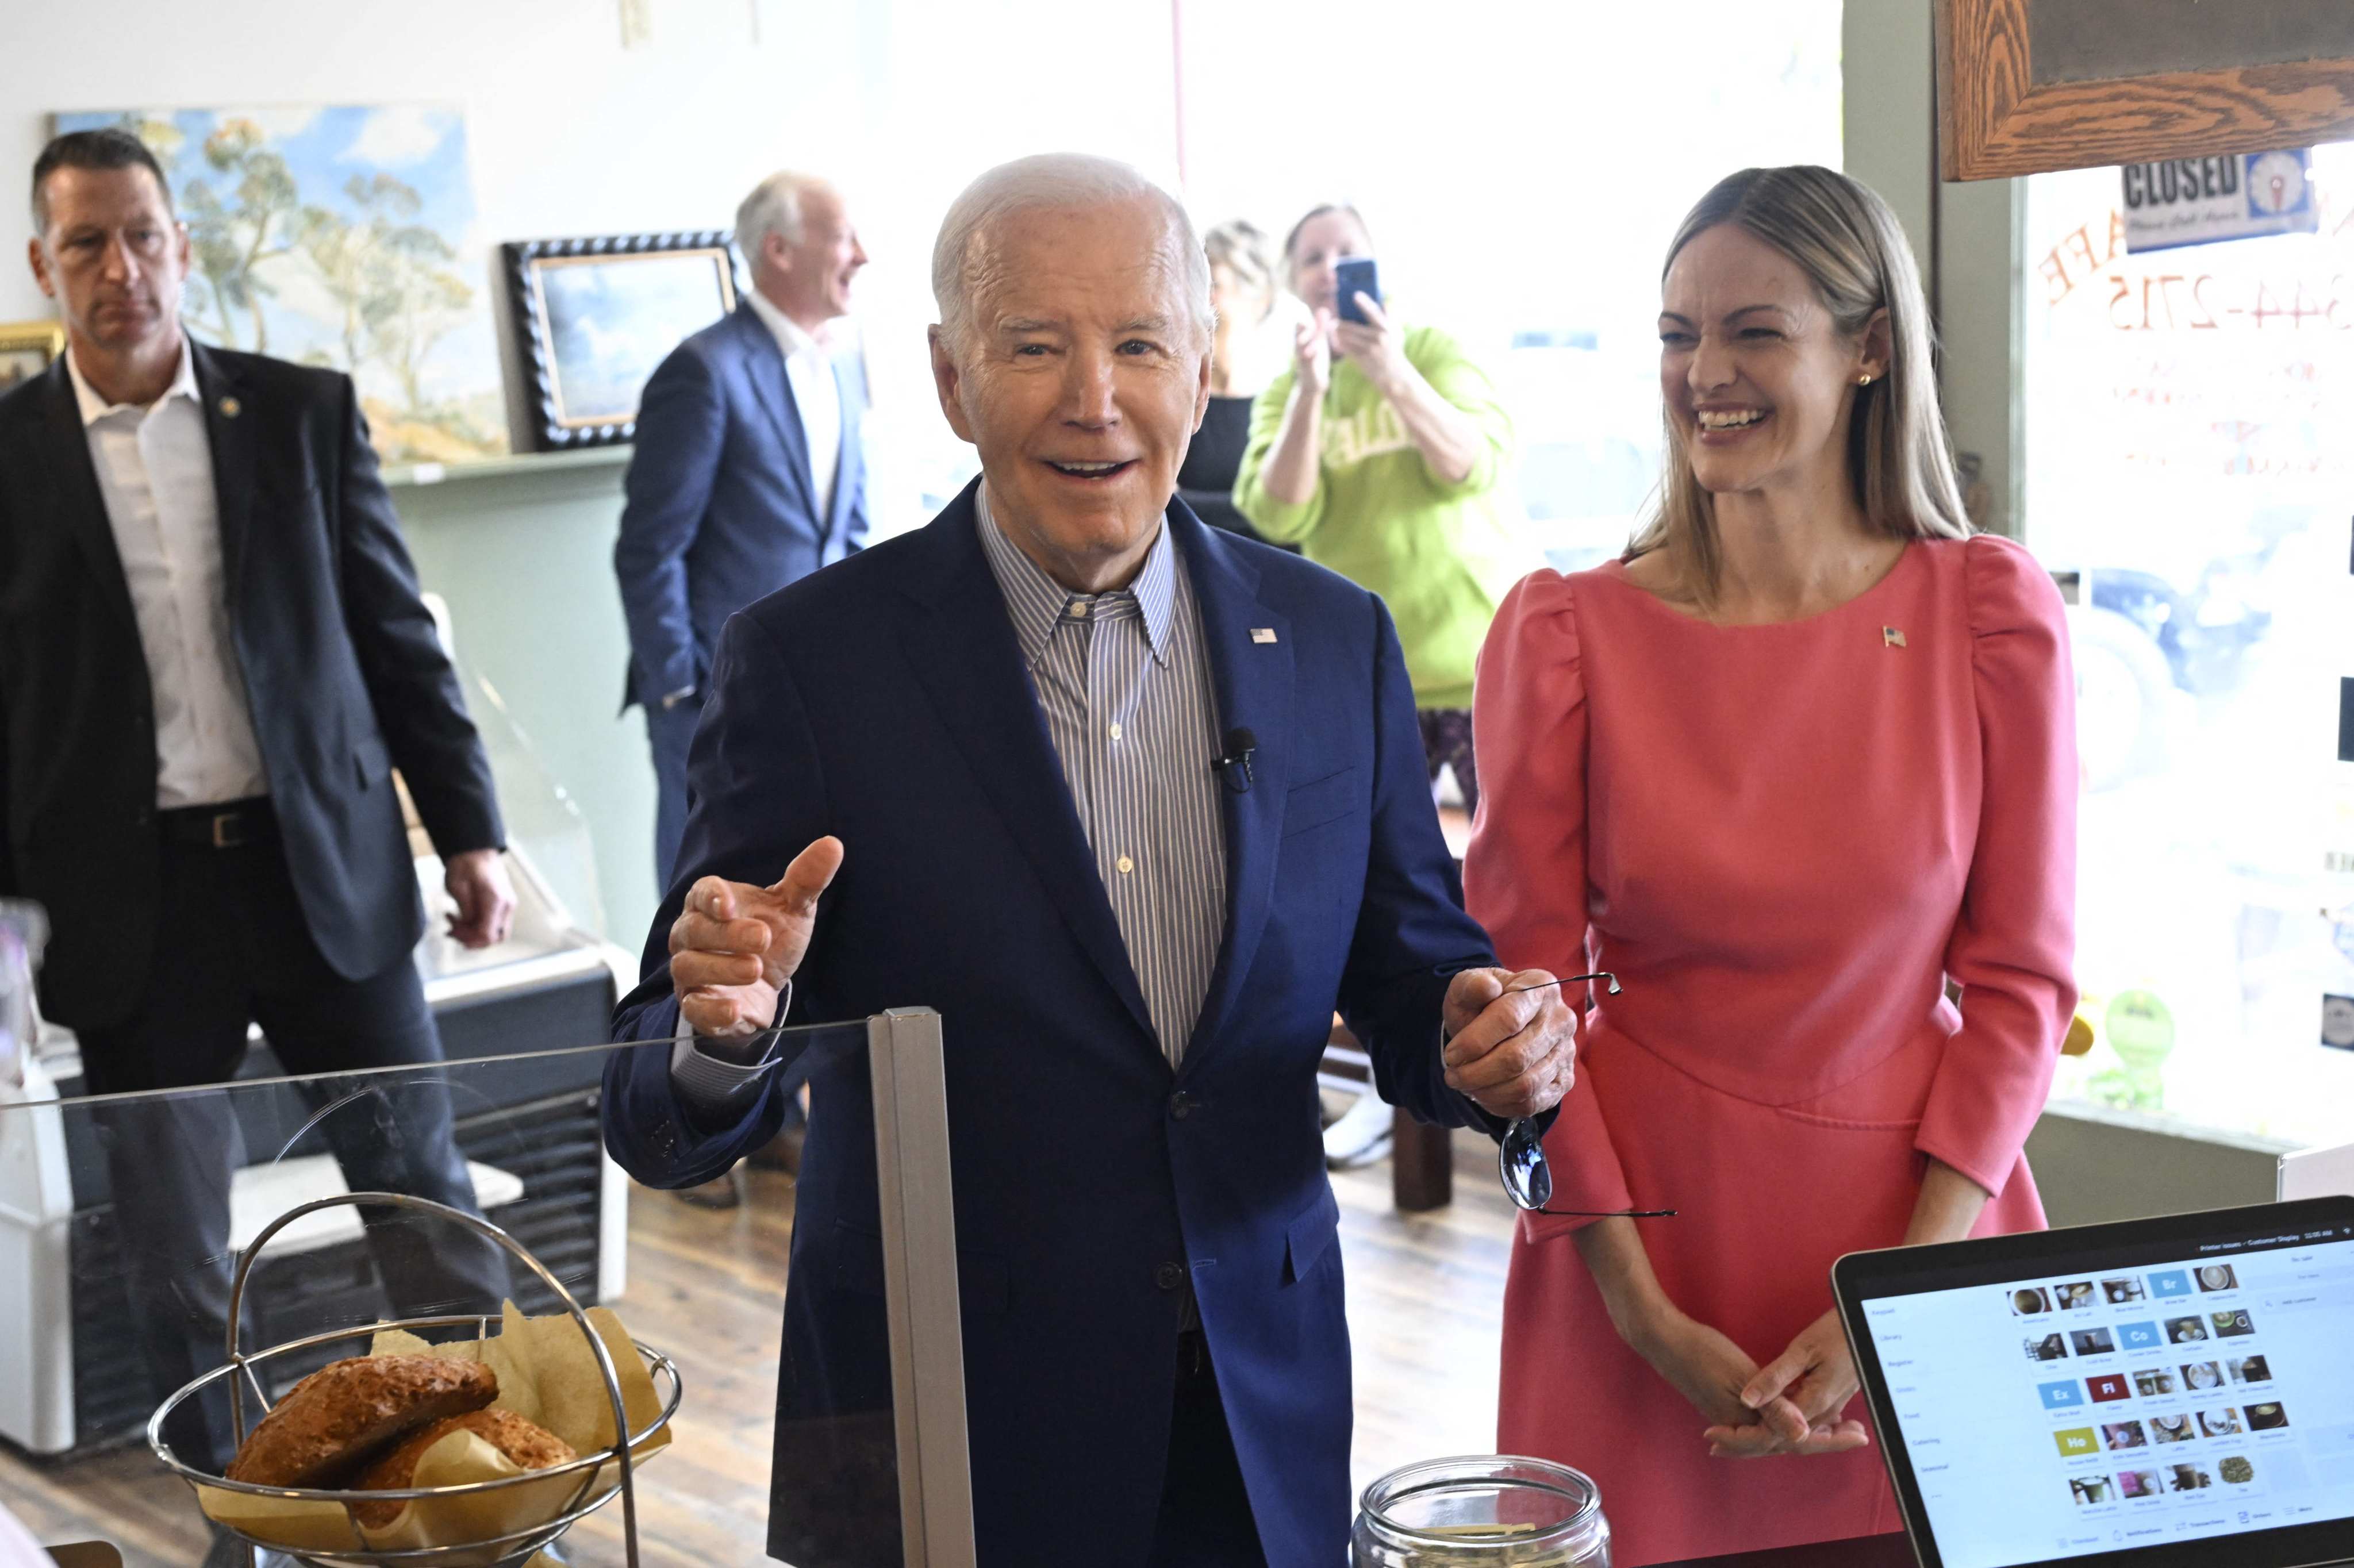 US President Joe Biden visits a cafe in Scranton, Pennsylvania, with Mayor Paige Cognetti on Wednesday before departing for Pittsburgh, where he will meet with steelworkers. Photo: AFP